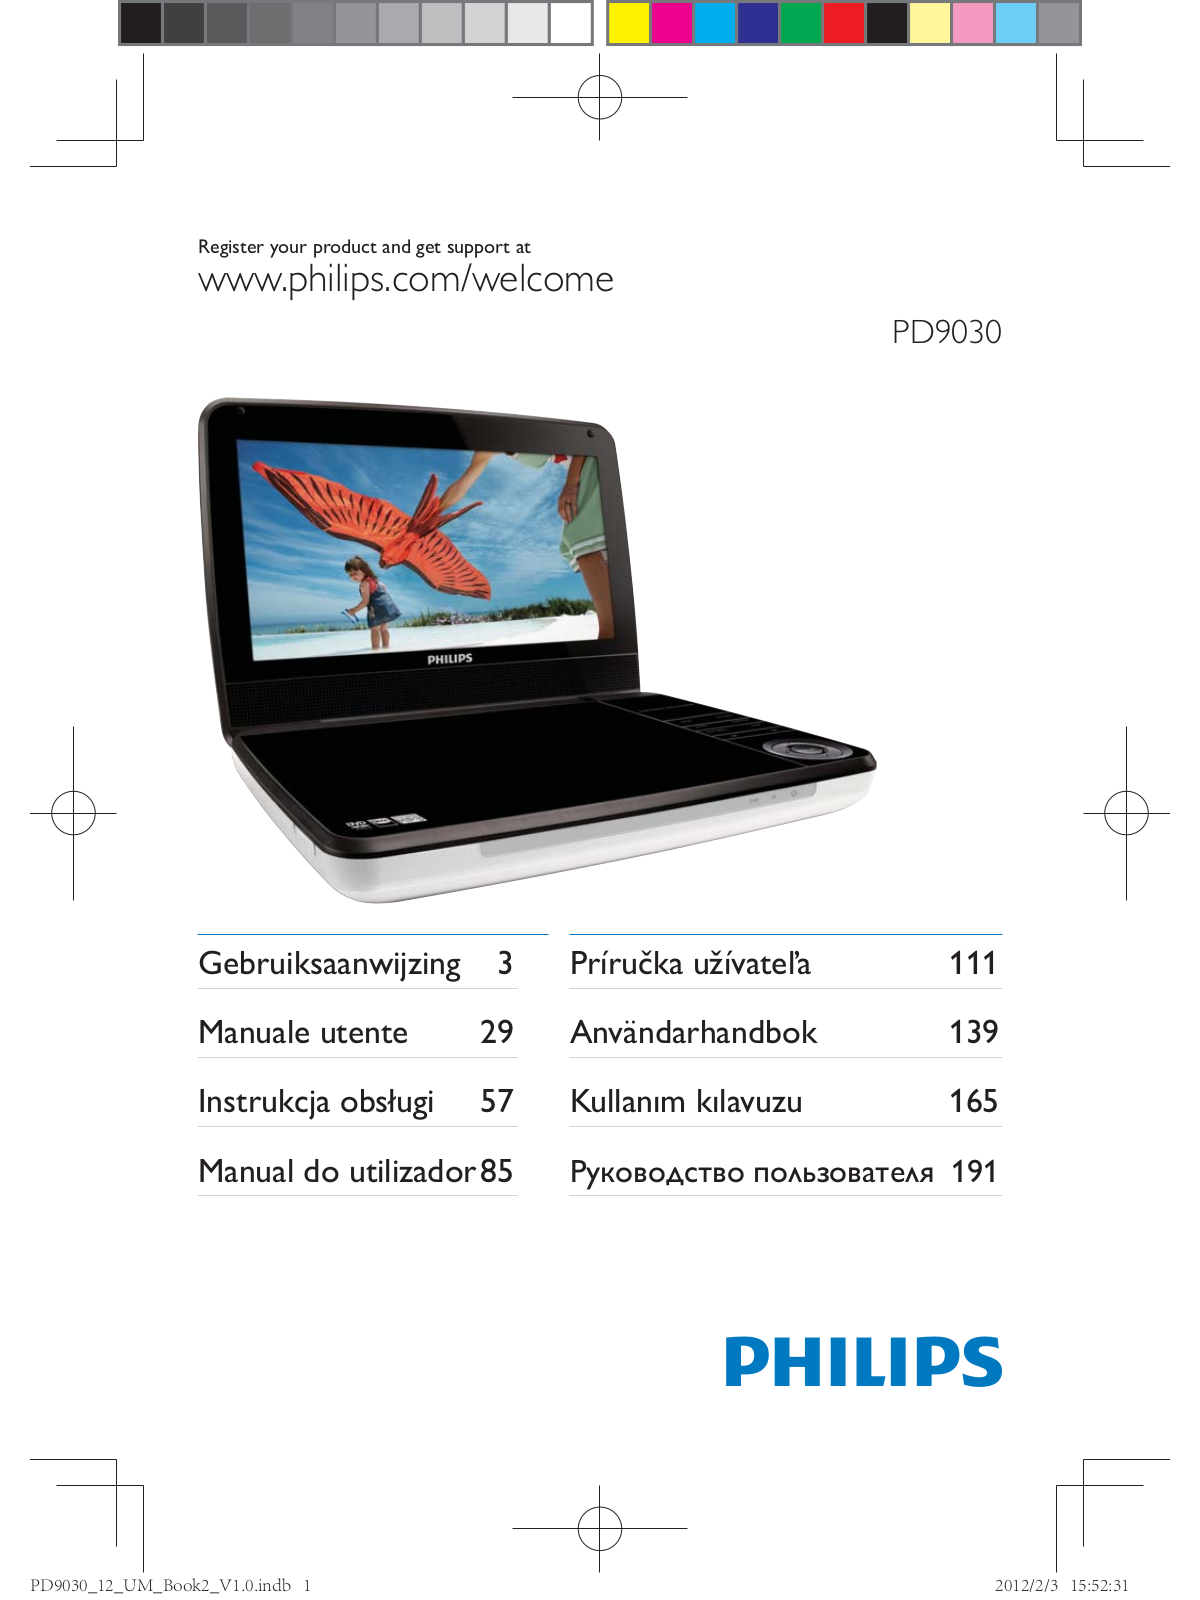 PHILIPS PD9030 User Manual